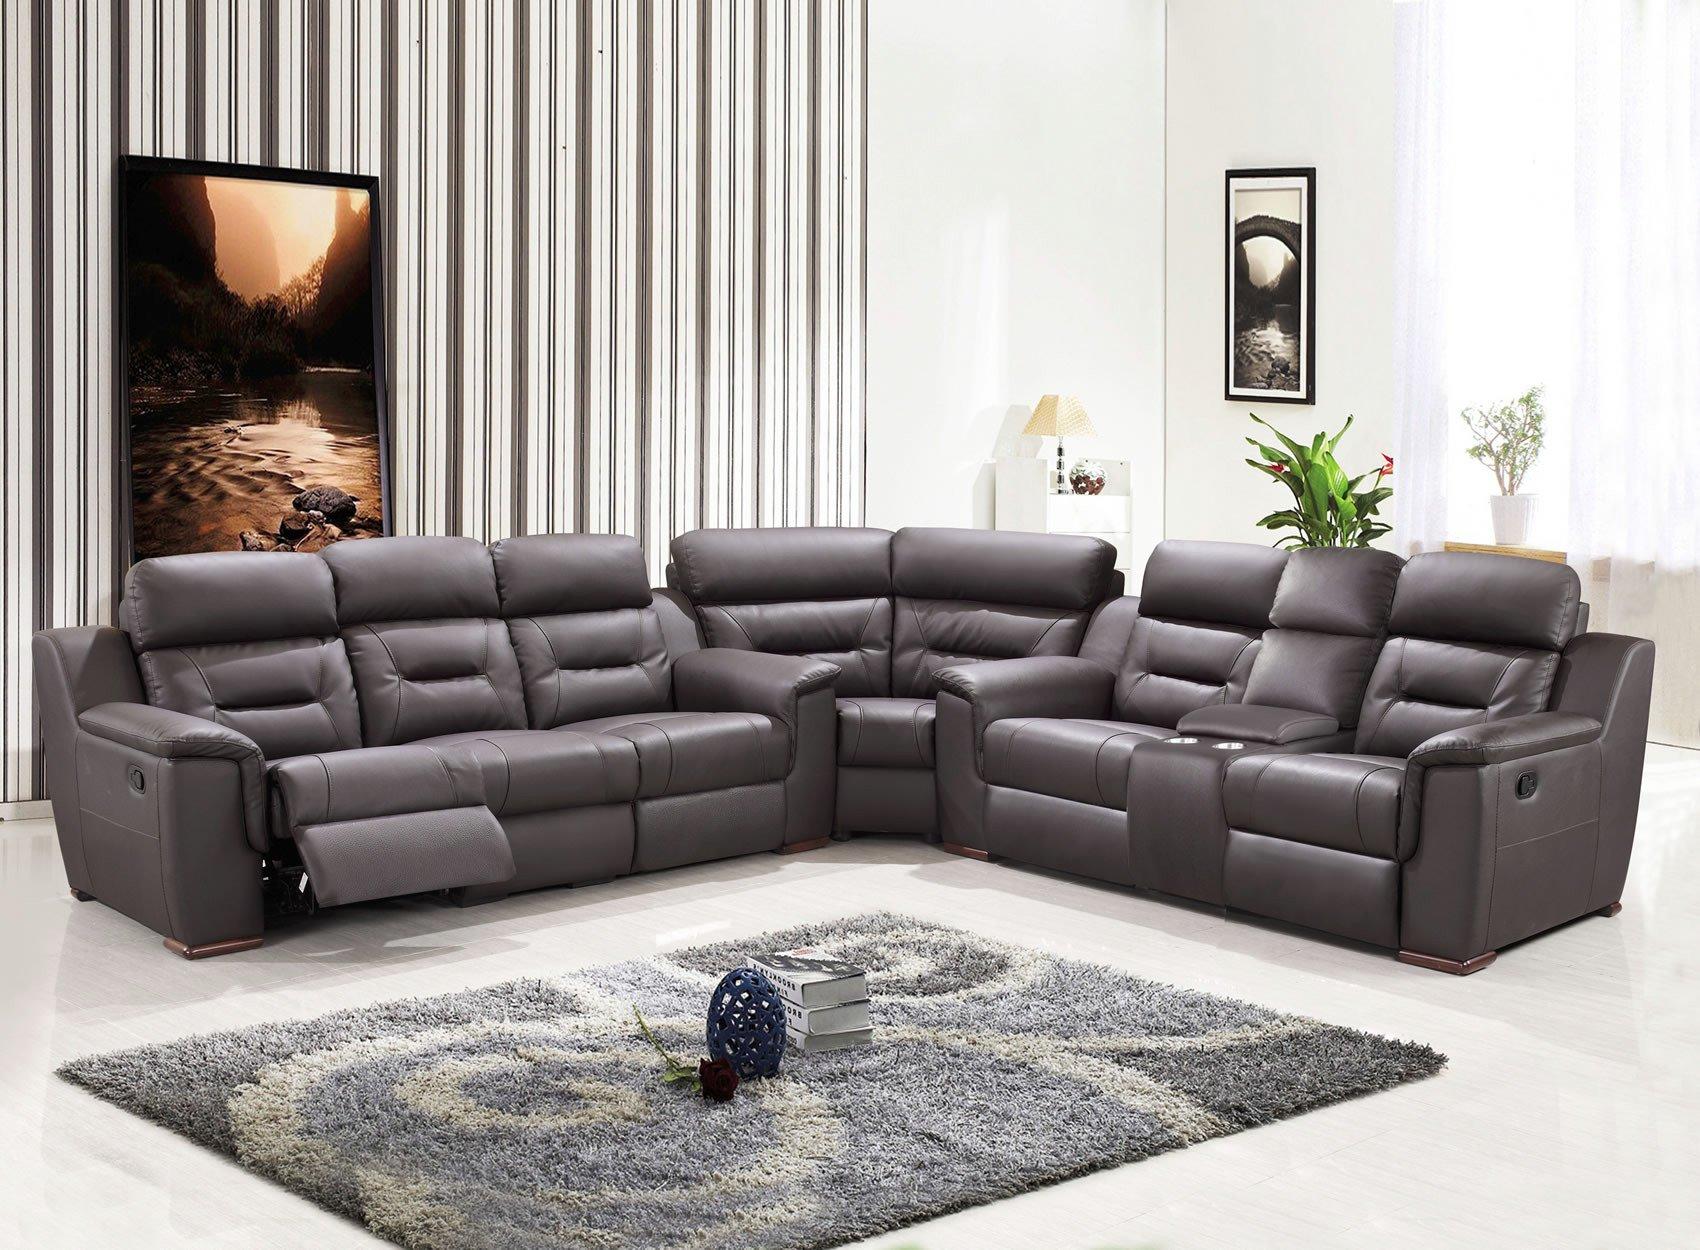 Contemporary Reclining Sectional UR9408 SEC DRK BROWN UR9408 SEC DRK BROWN in Dark Brown leather gel